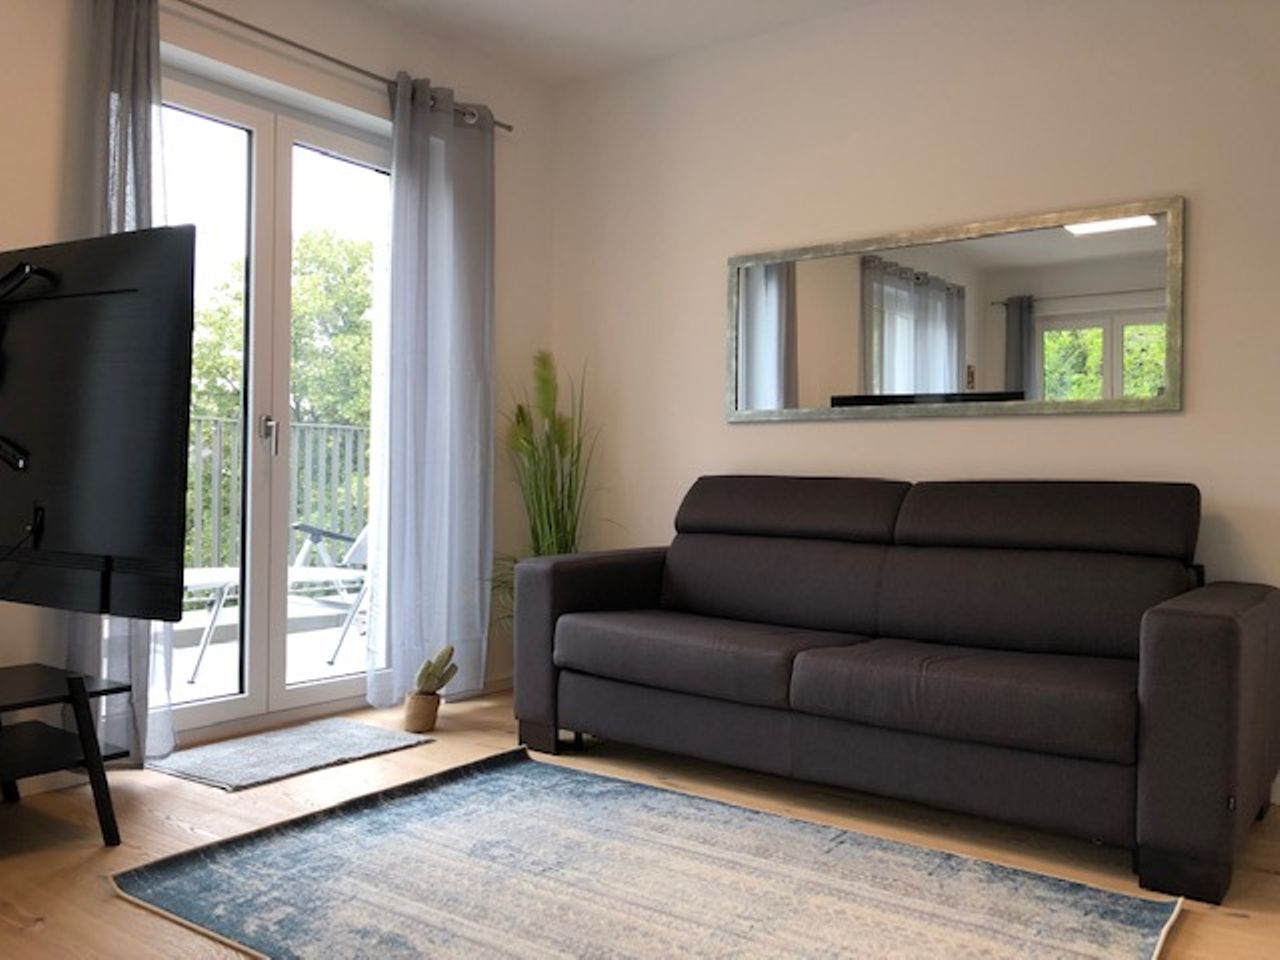 New fully furnished luxurious apartment in the very nice area Berlin-Wilhelmsruh